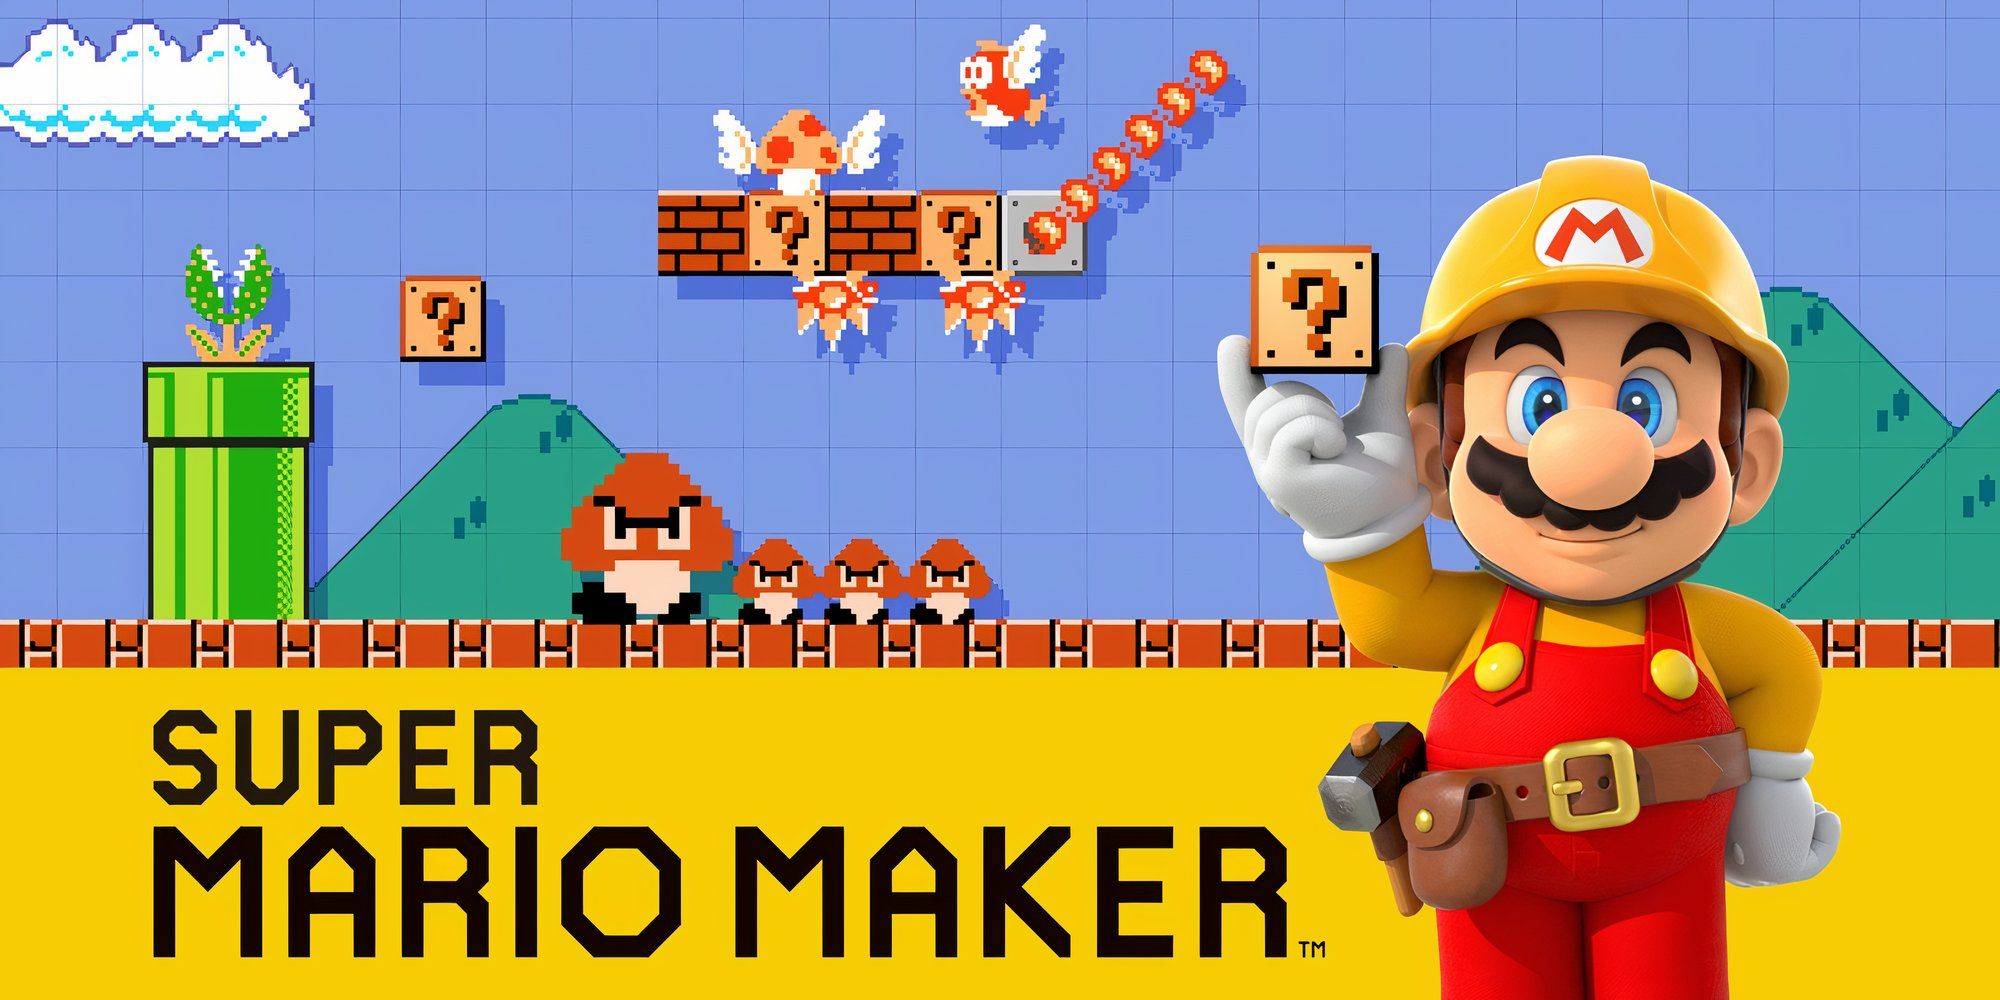 Promo art featuring characters in Super Mario Maker